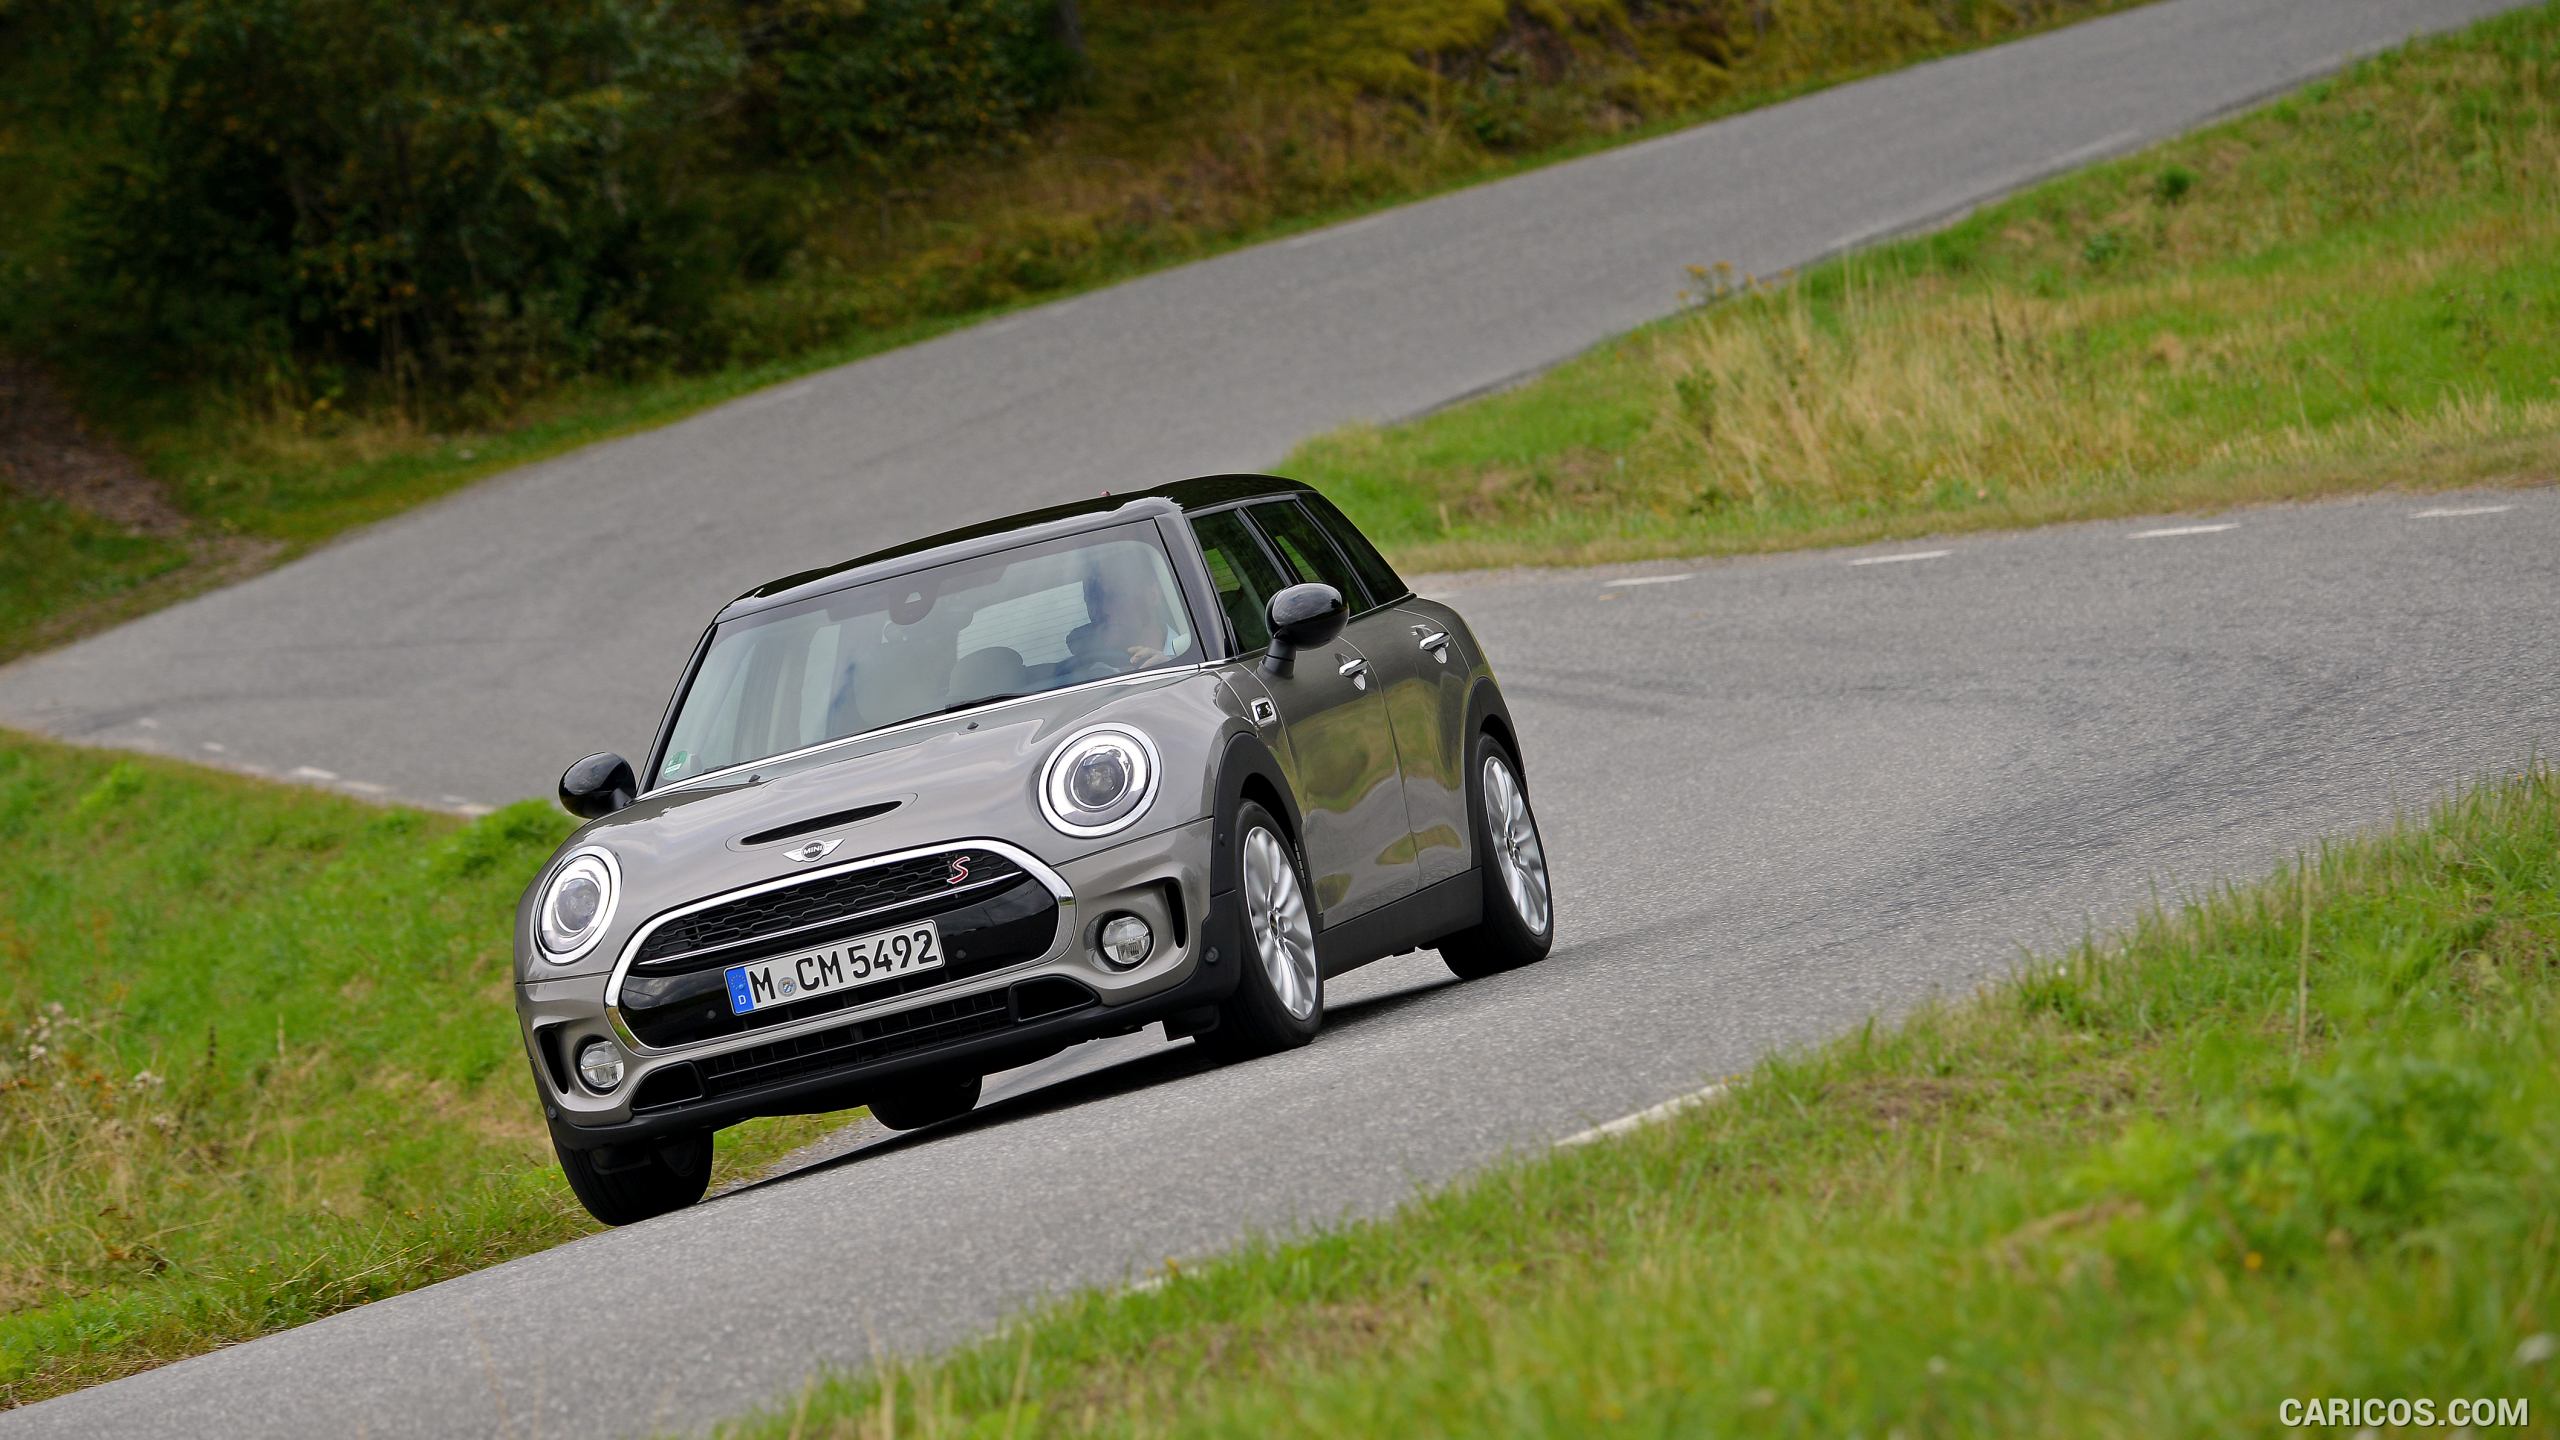 2016 MINI Cooper S Clubman in Metallic Melting Silver - Front, #161 of 380